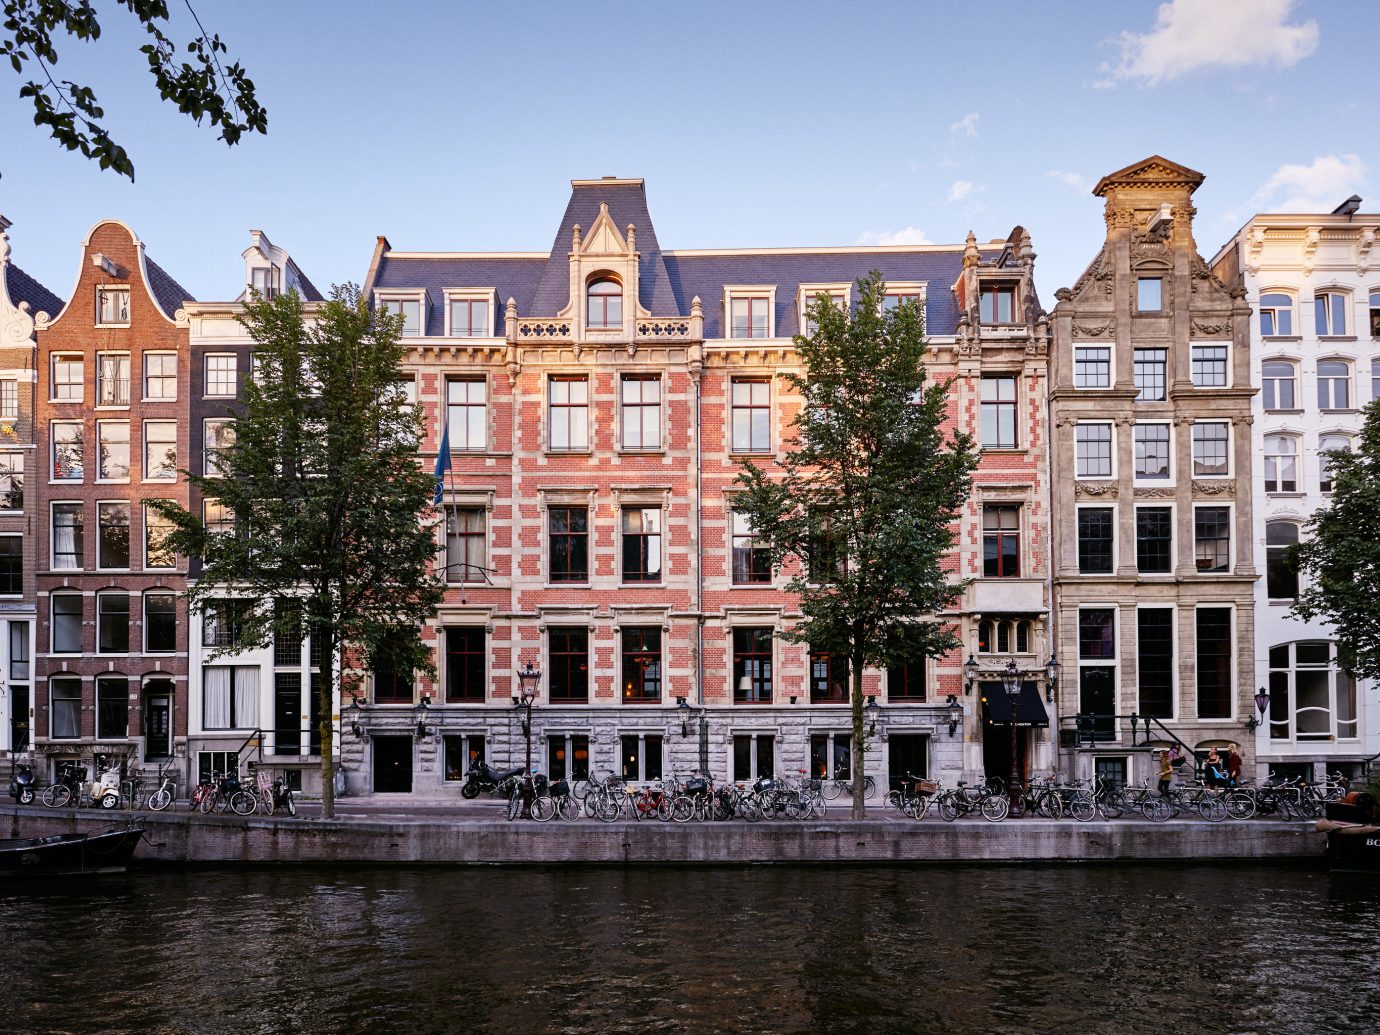 Amsterdam Boutique Hotels Hotels The Netherlands building sky water outdoor Canal landmark City waterway Town urban area neighbourhood human settlement Architecture house River cityscape Downtown estate facade town square surrounded several